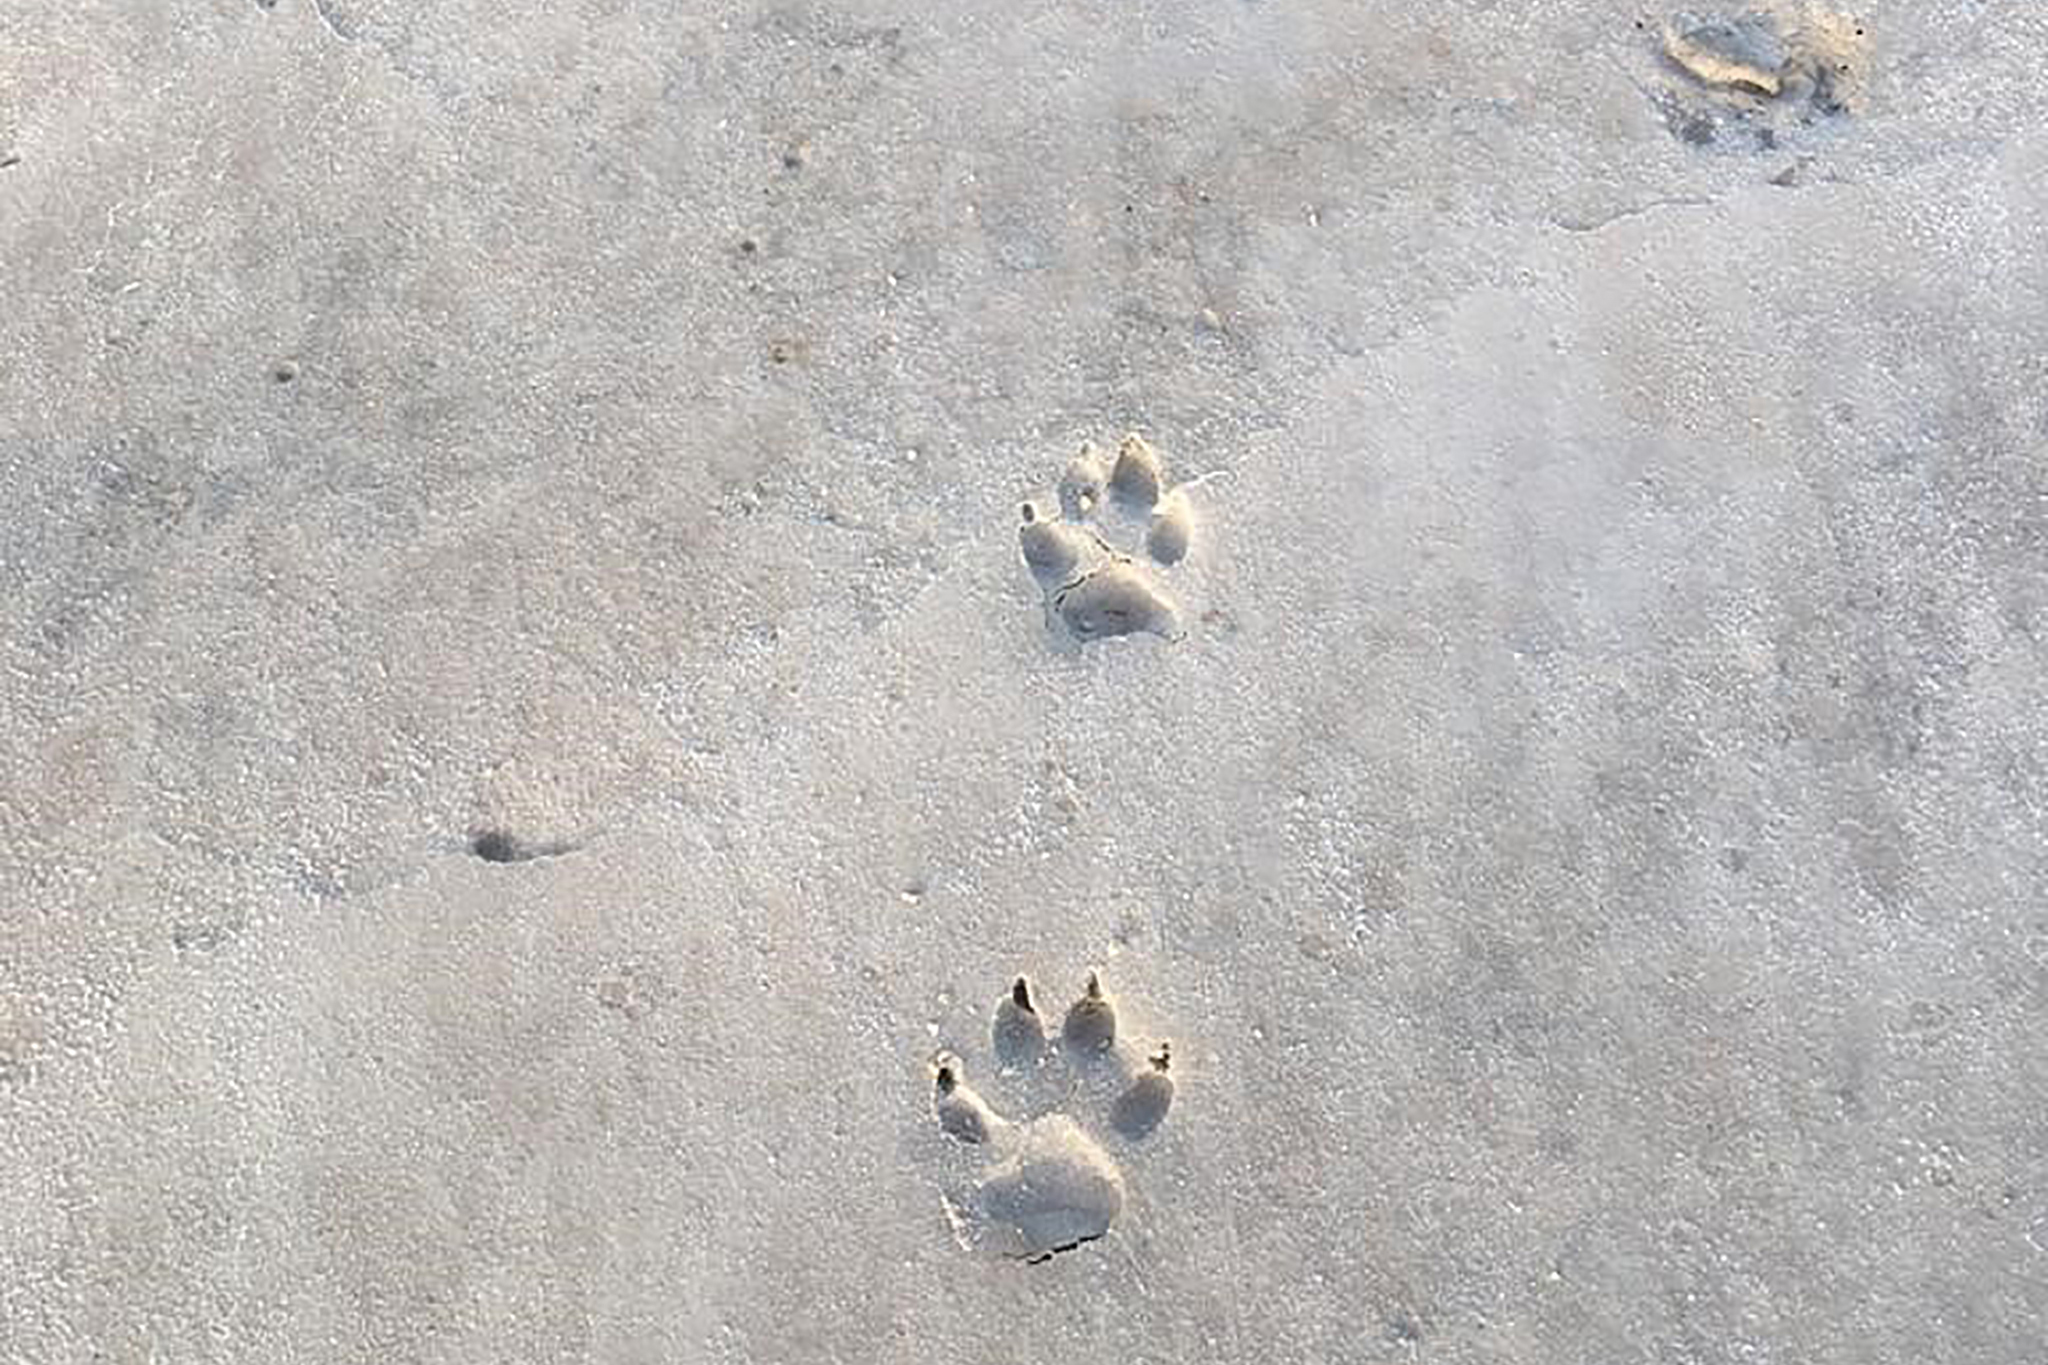 The delta is known for a high biodiversity of flora and fauna. These are hyena tracks. © OS, WeForest